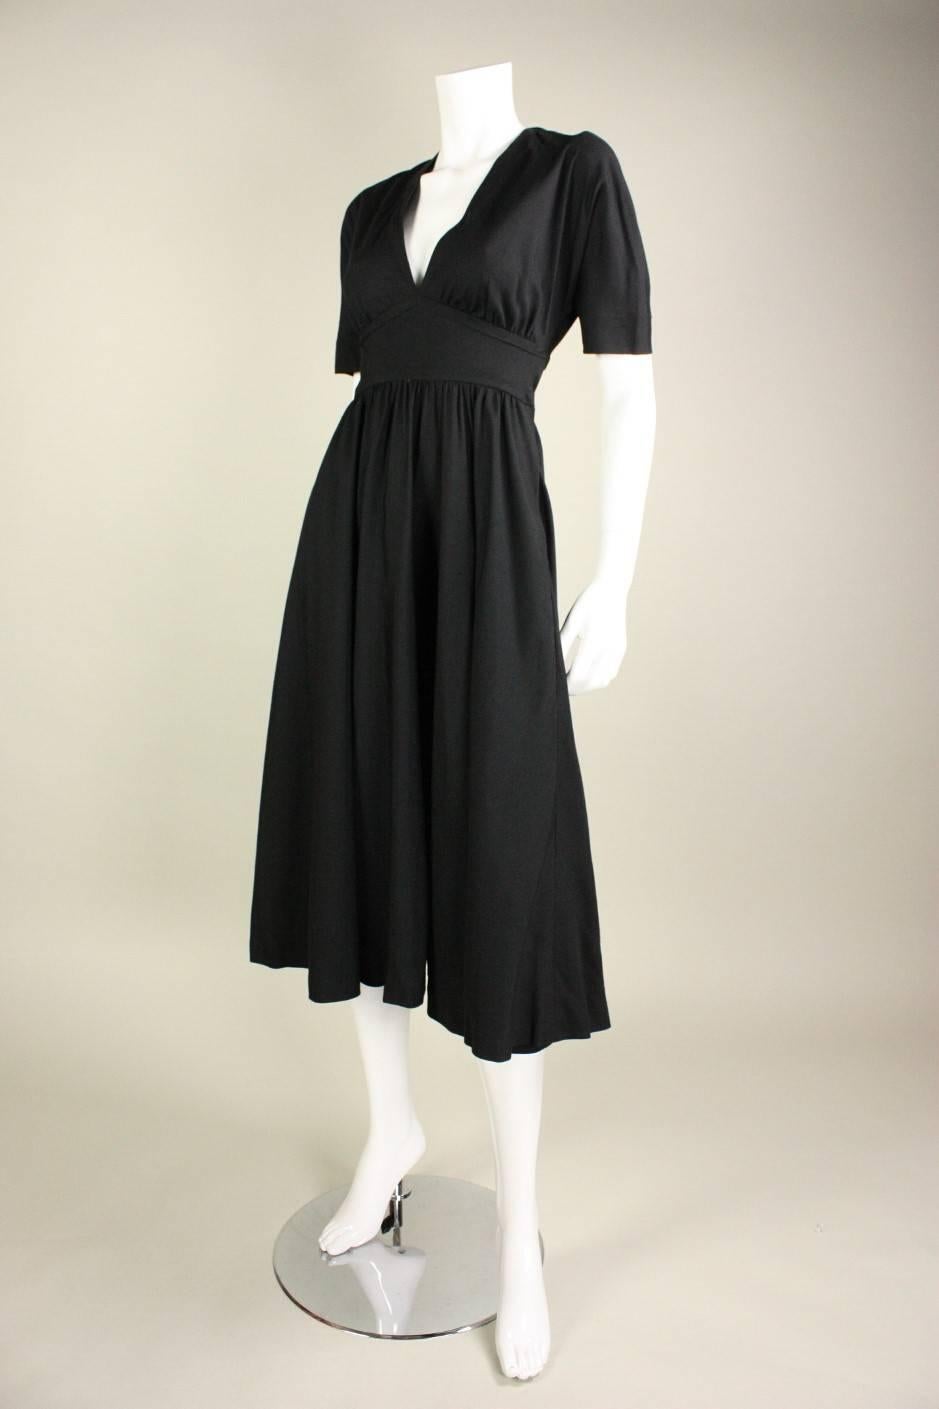 Vintage little black dress from Halston is made of silk dupioni and dates to the 1970's.  Bodice features a deep v-neck, doleman sleeves, and is fitted from the underbust to the waist.  Full skirt is gathered all around waistband.  Two ties at the